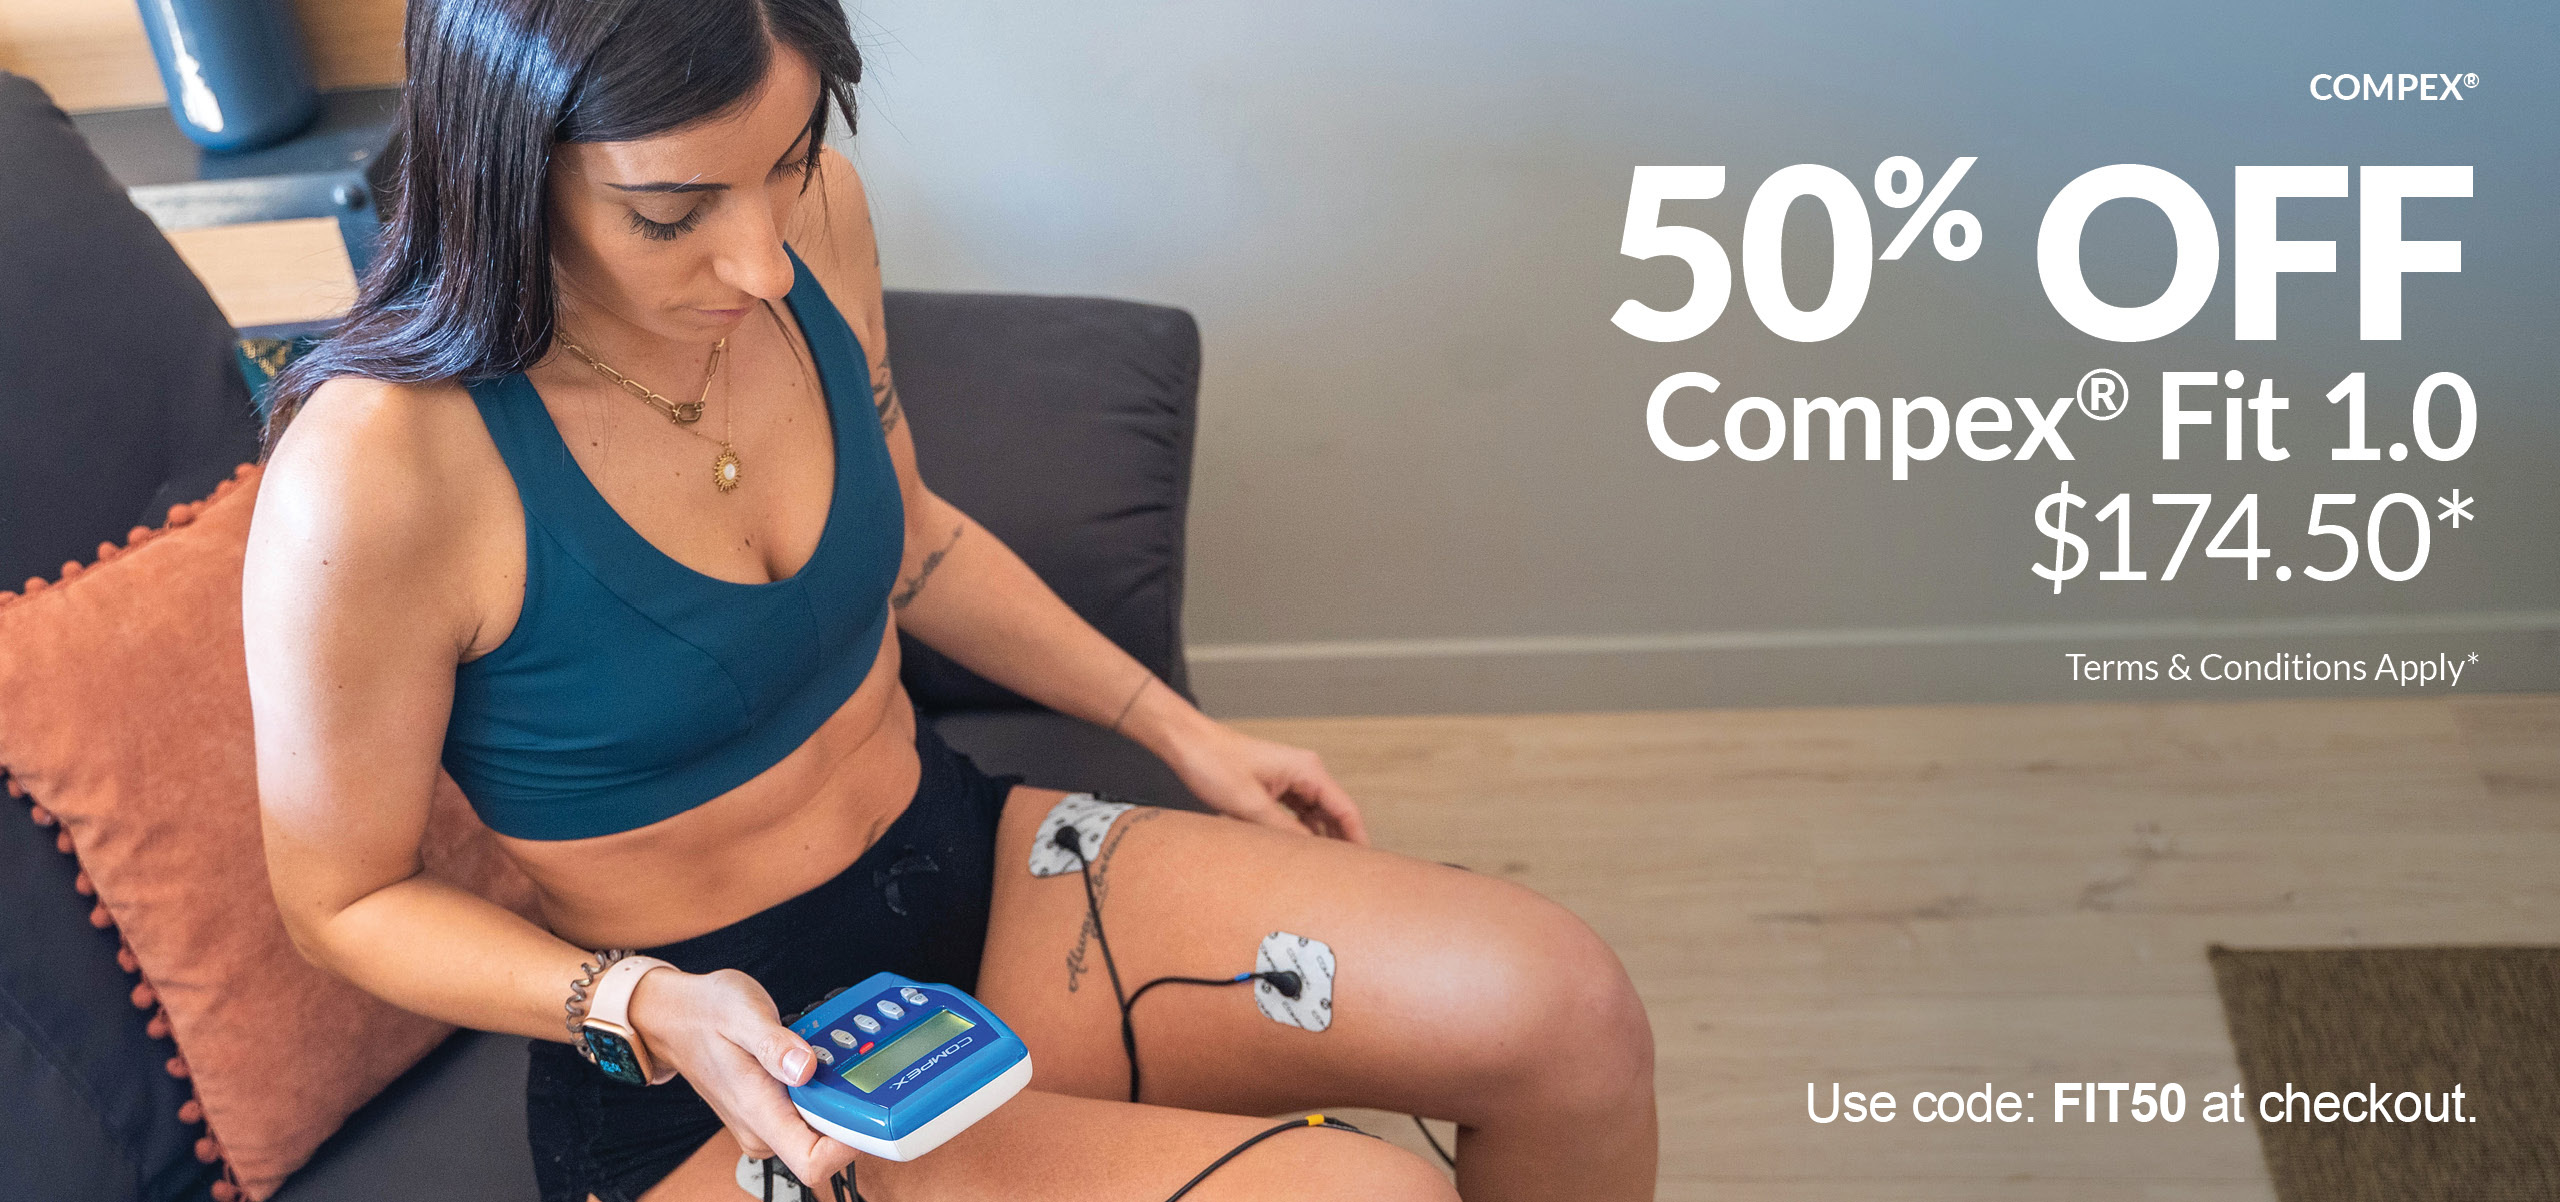 Compex Fit 1.0 offer